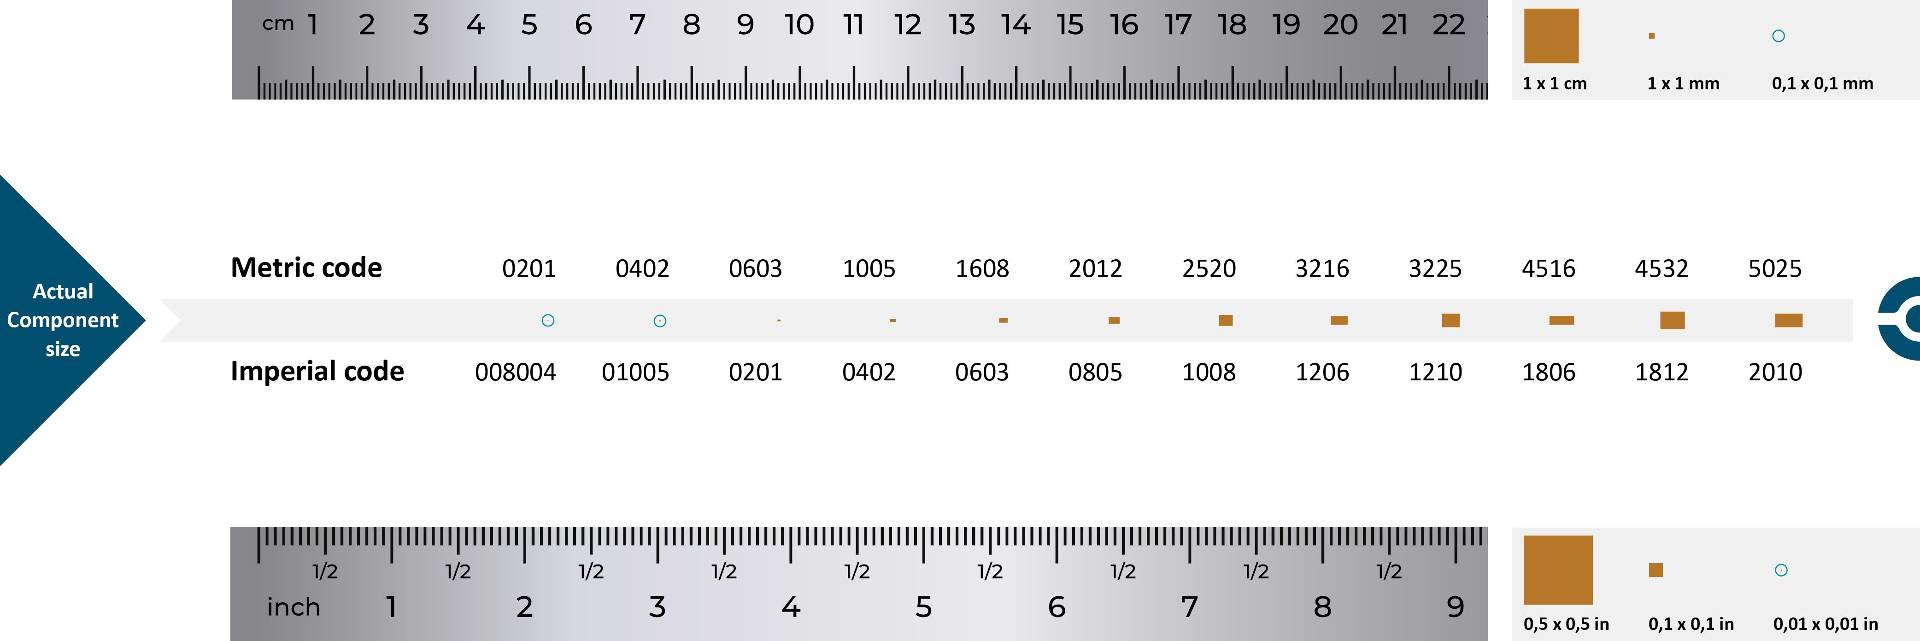 SMD size chart with SMD size code in Imperial and Metric. Download this SMD size chart.